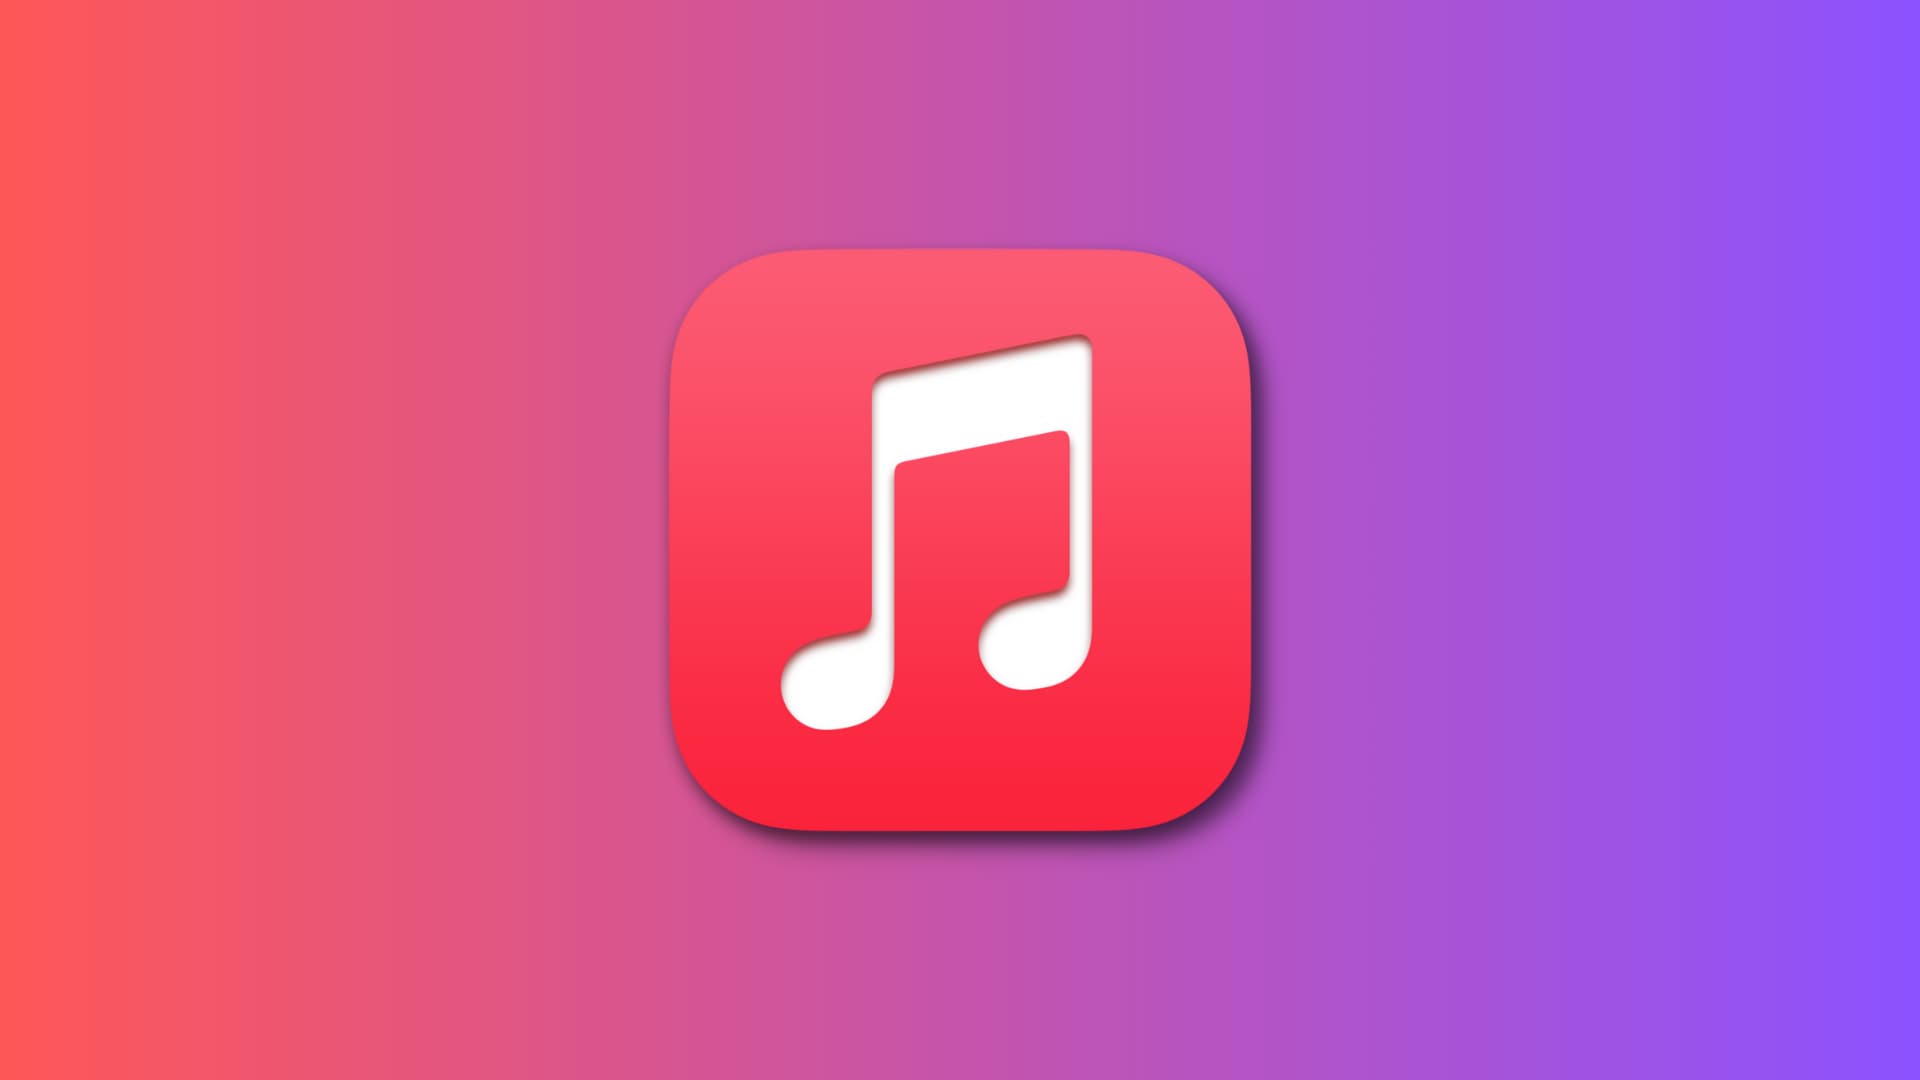 Apple Music app icon on a red and purple gradient background.